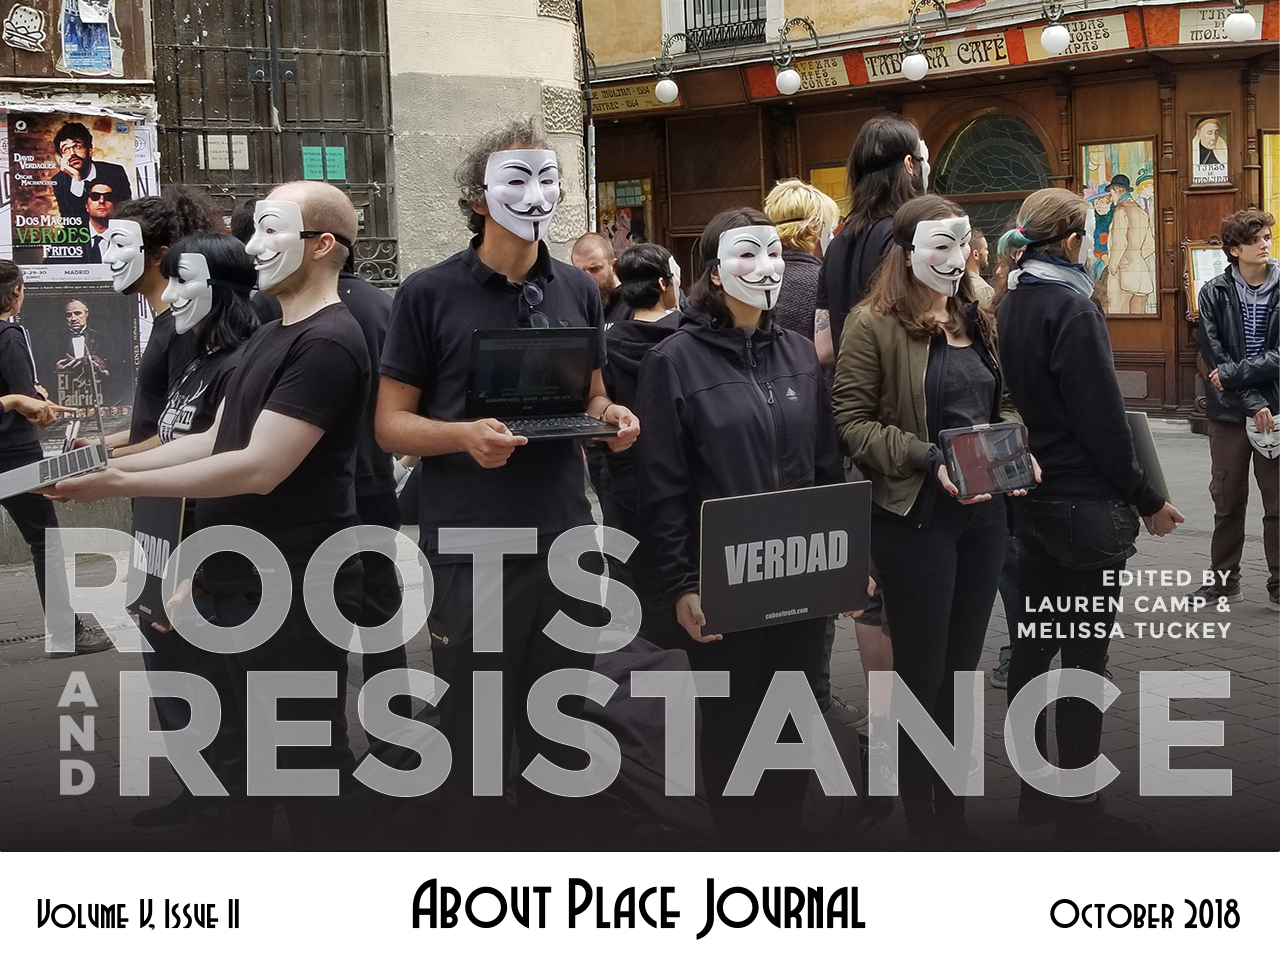 Issue V, Volume II: Roots and Resistance, About Place Journal text overlay on photo of a protest